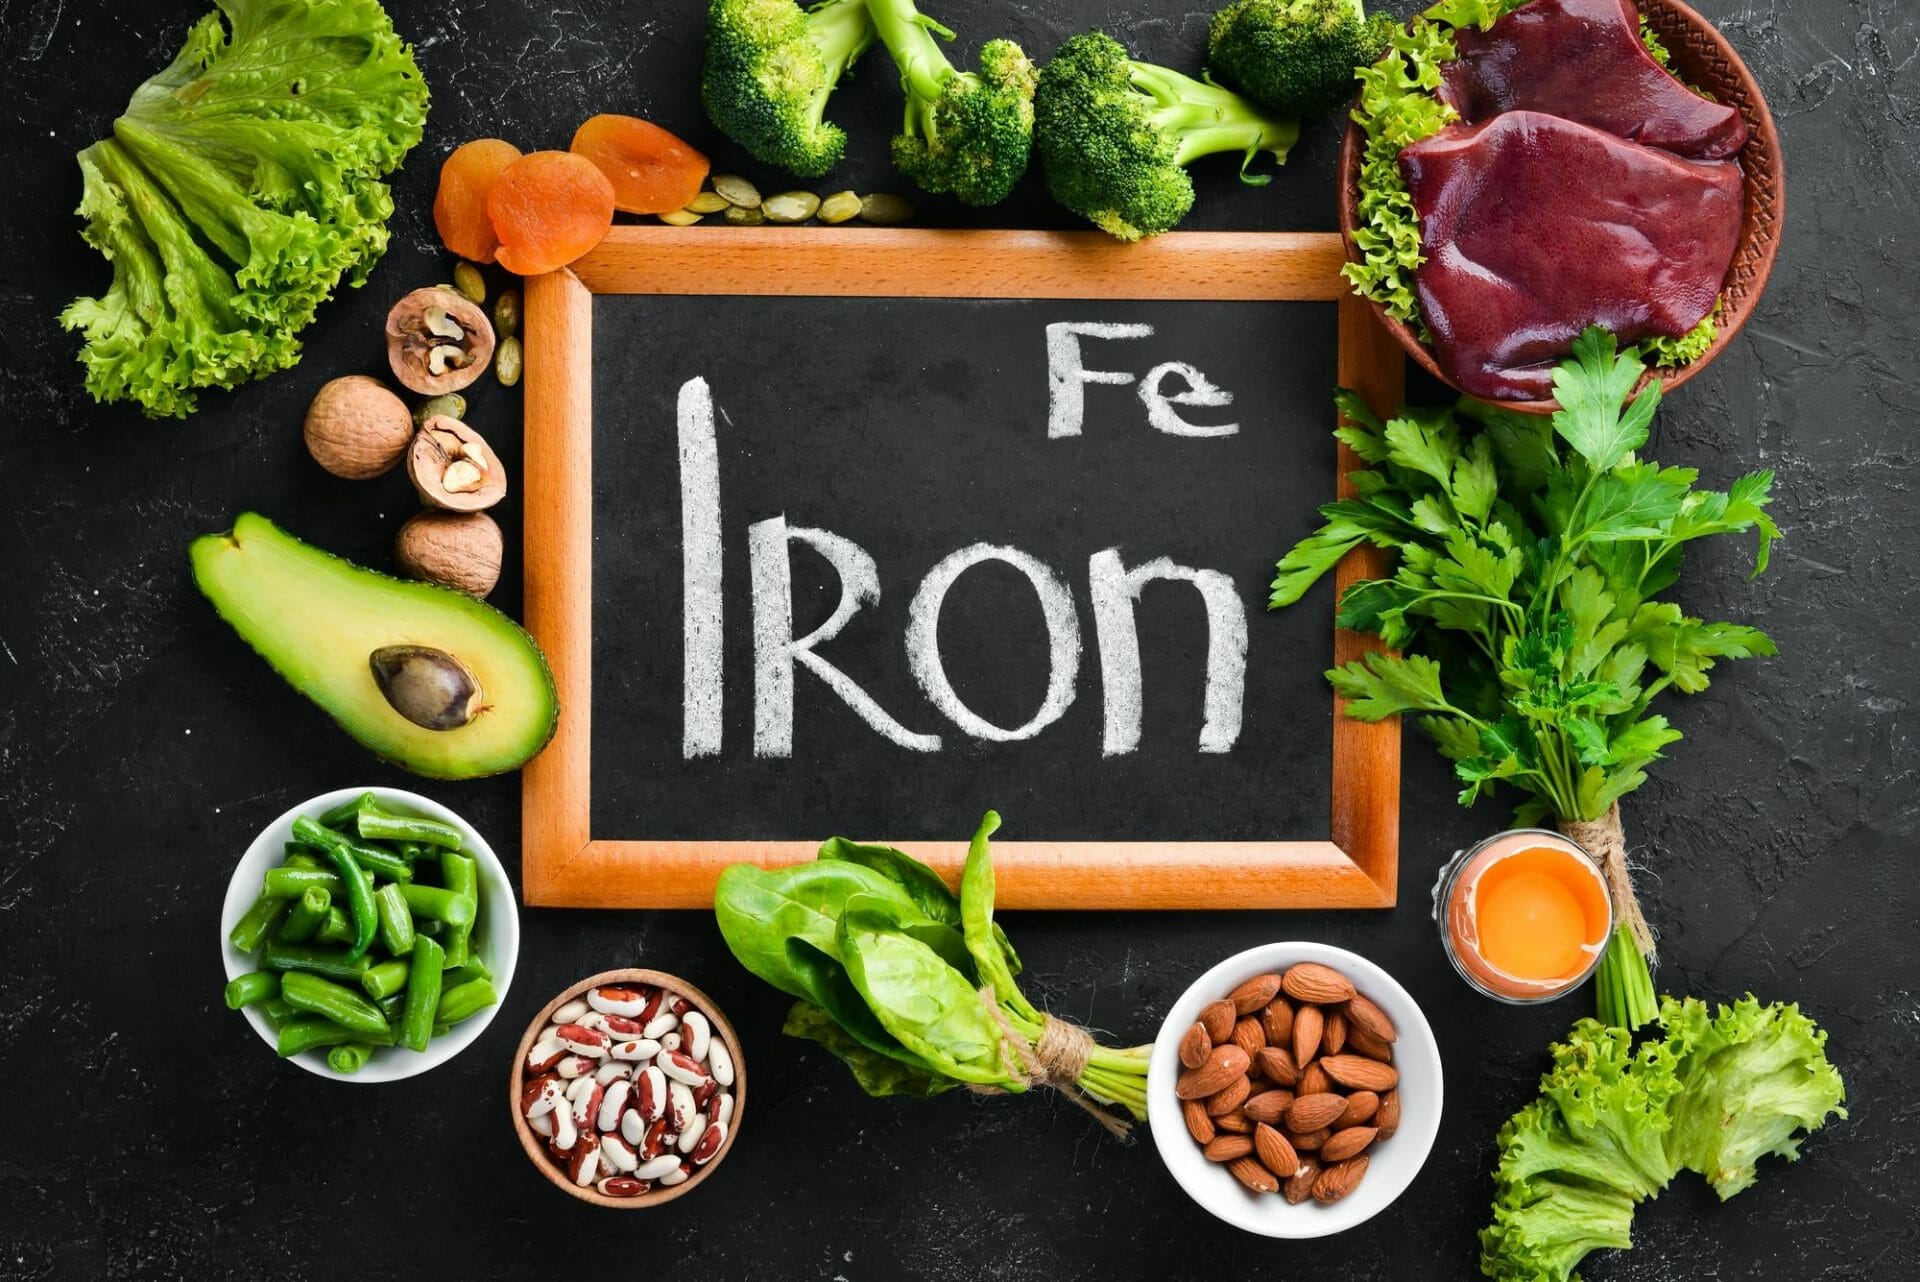 Iron and its health benefits